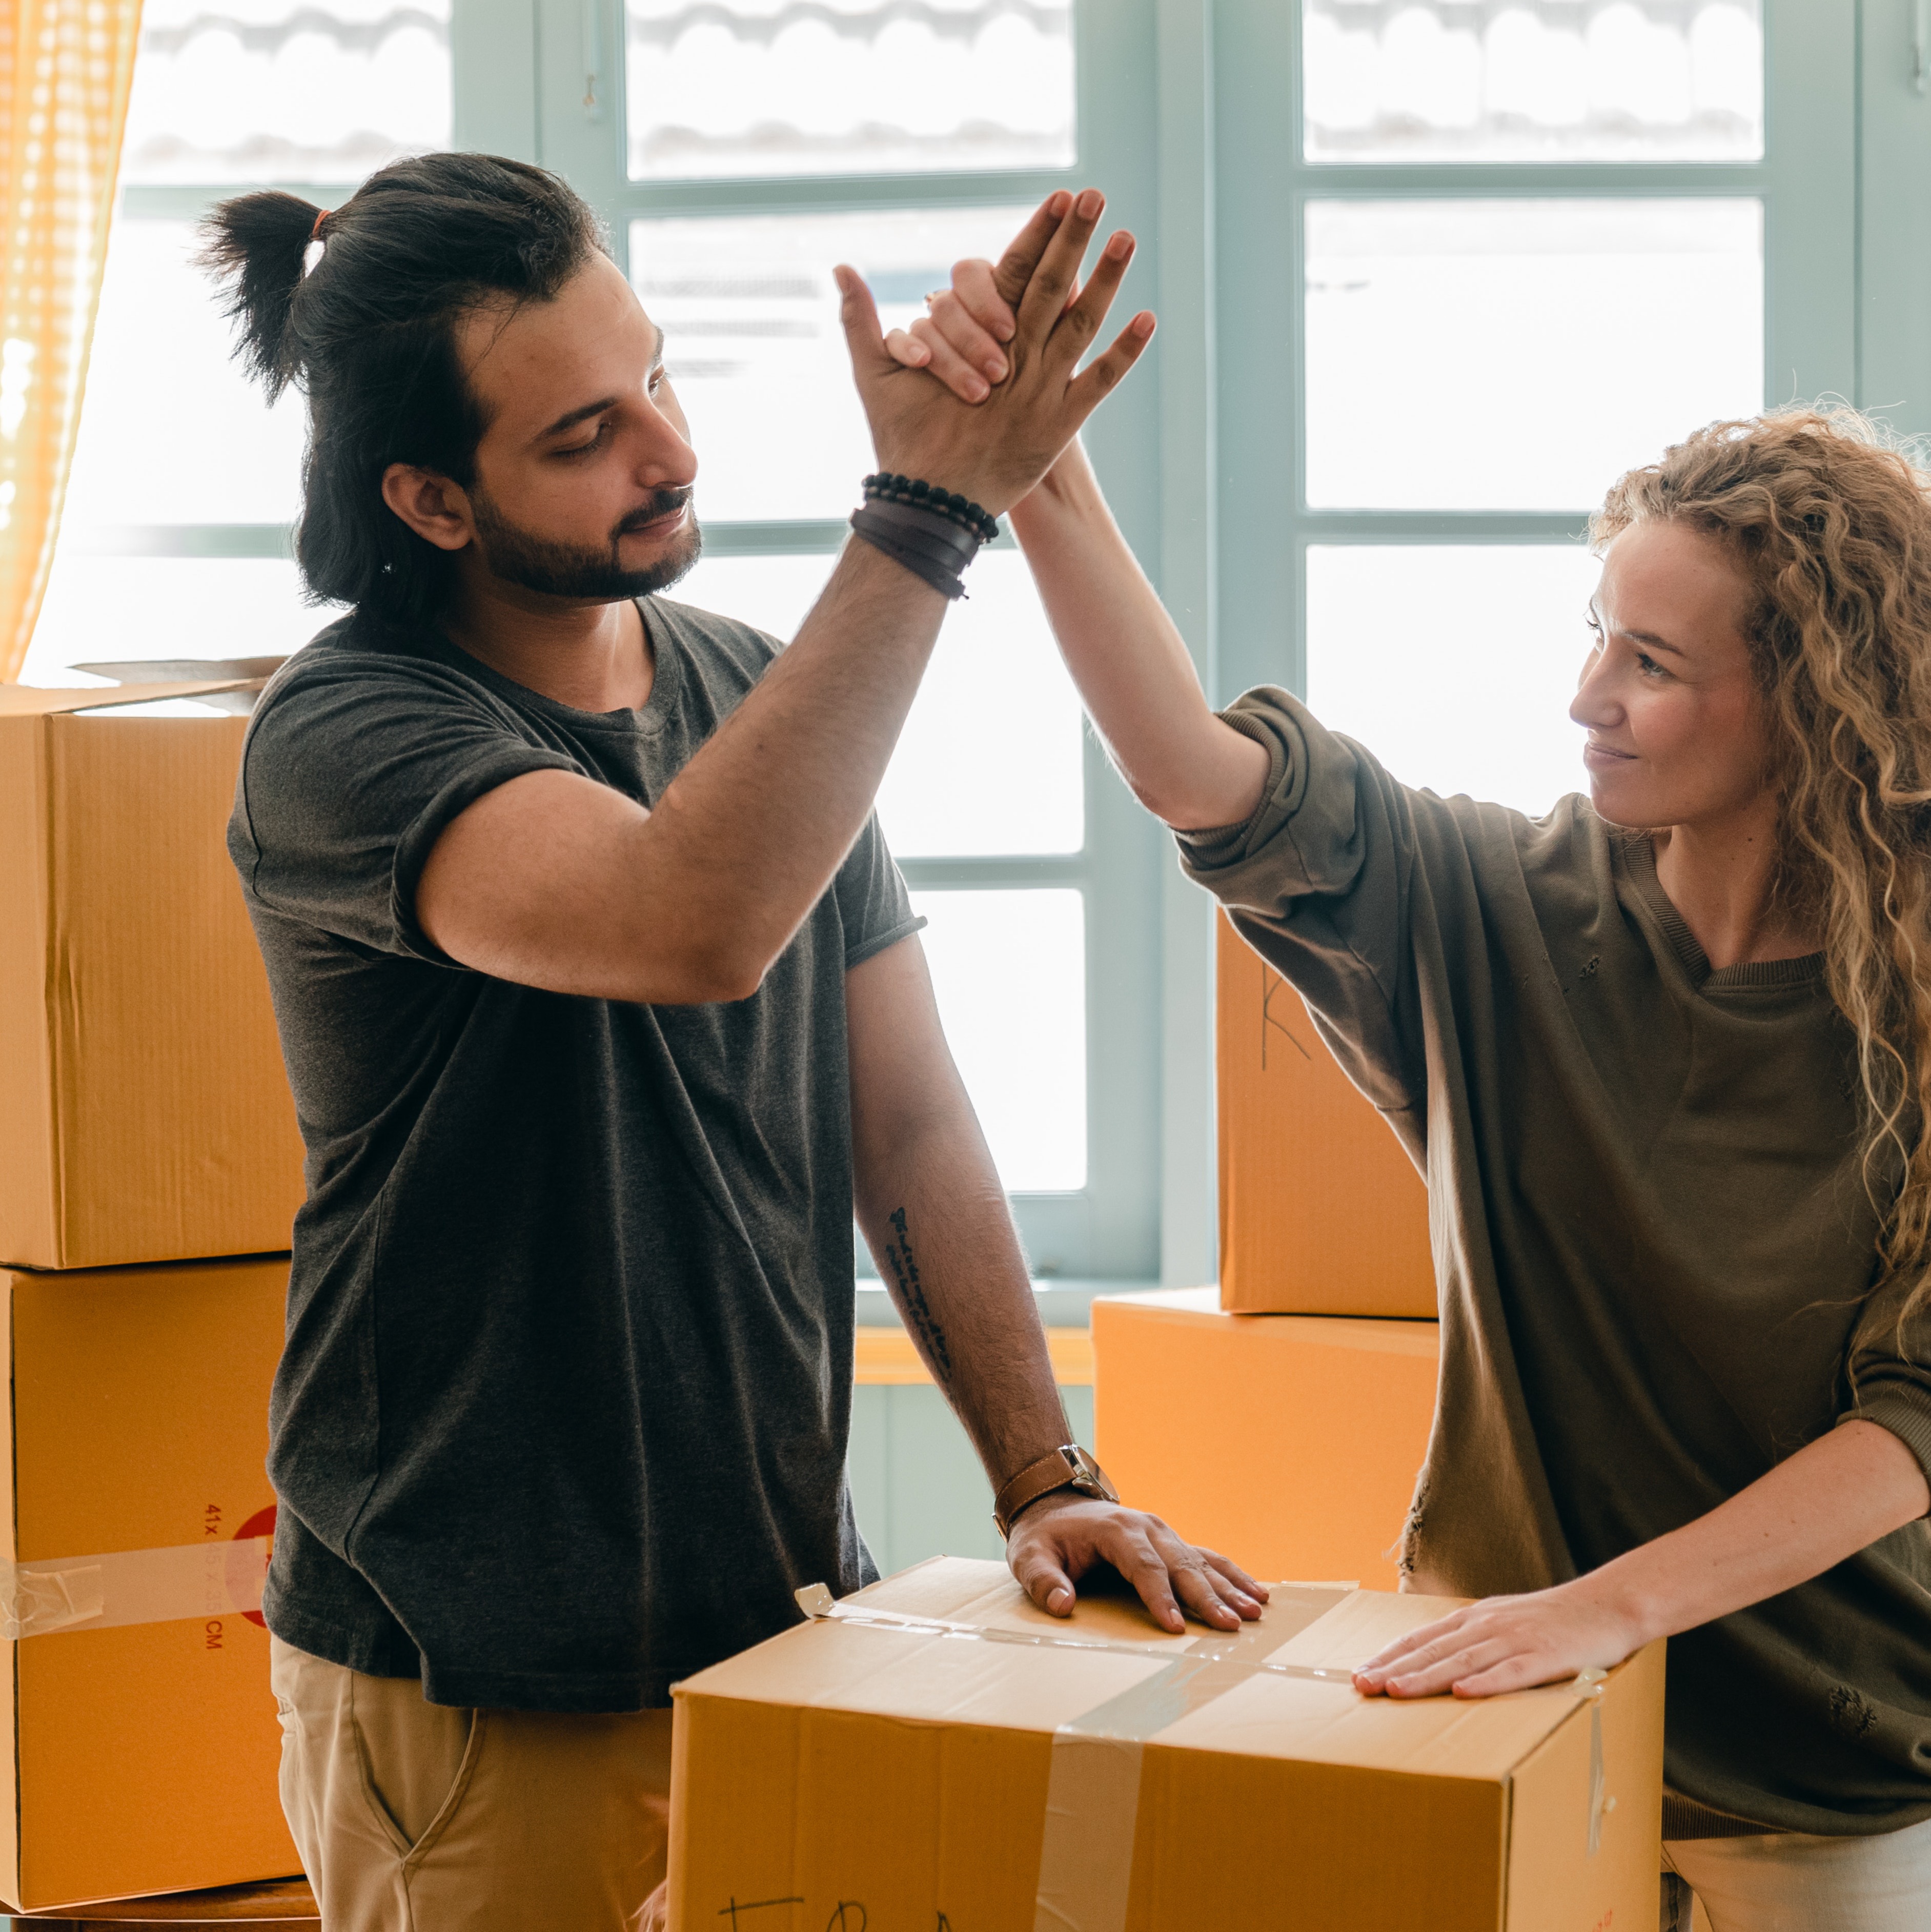 Couple giving each other a high five surrounded by moving boxes